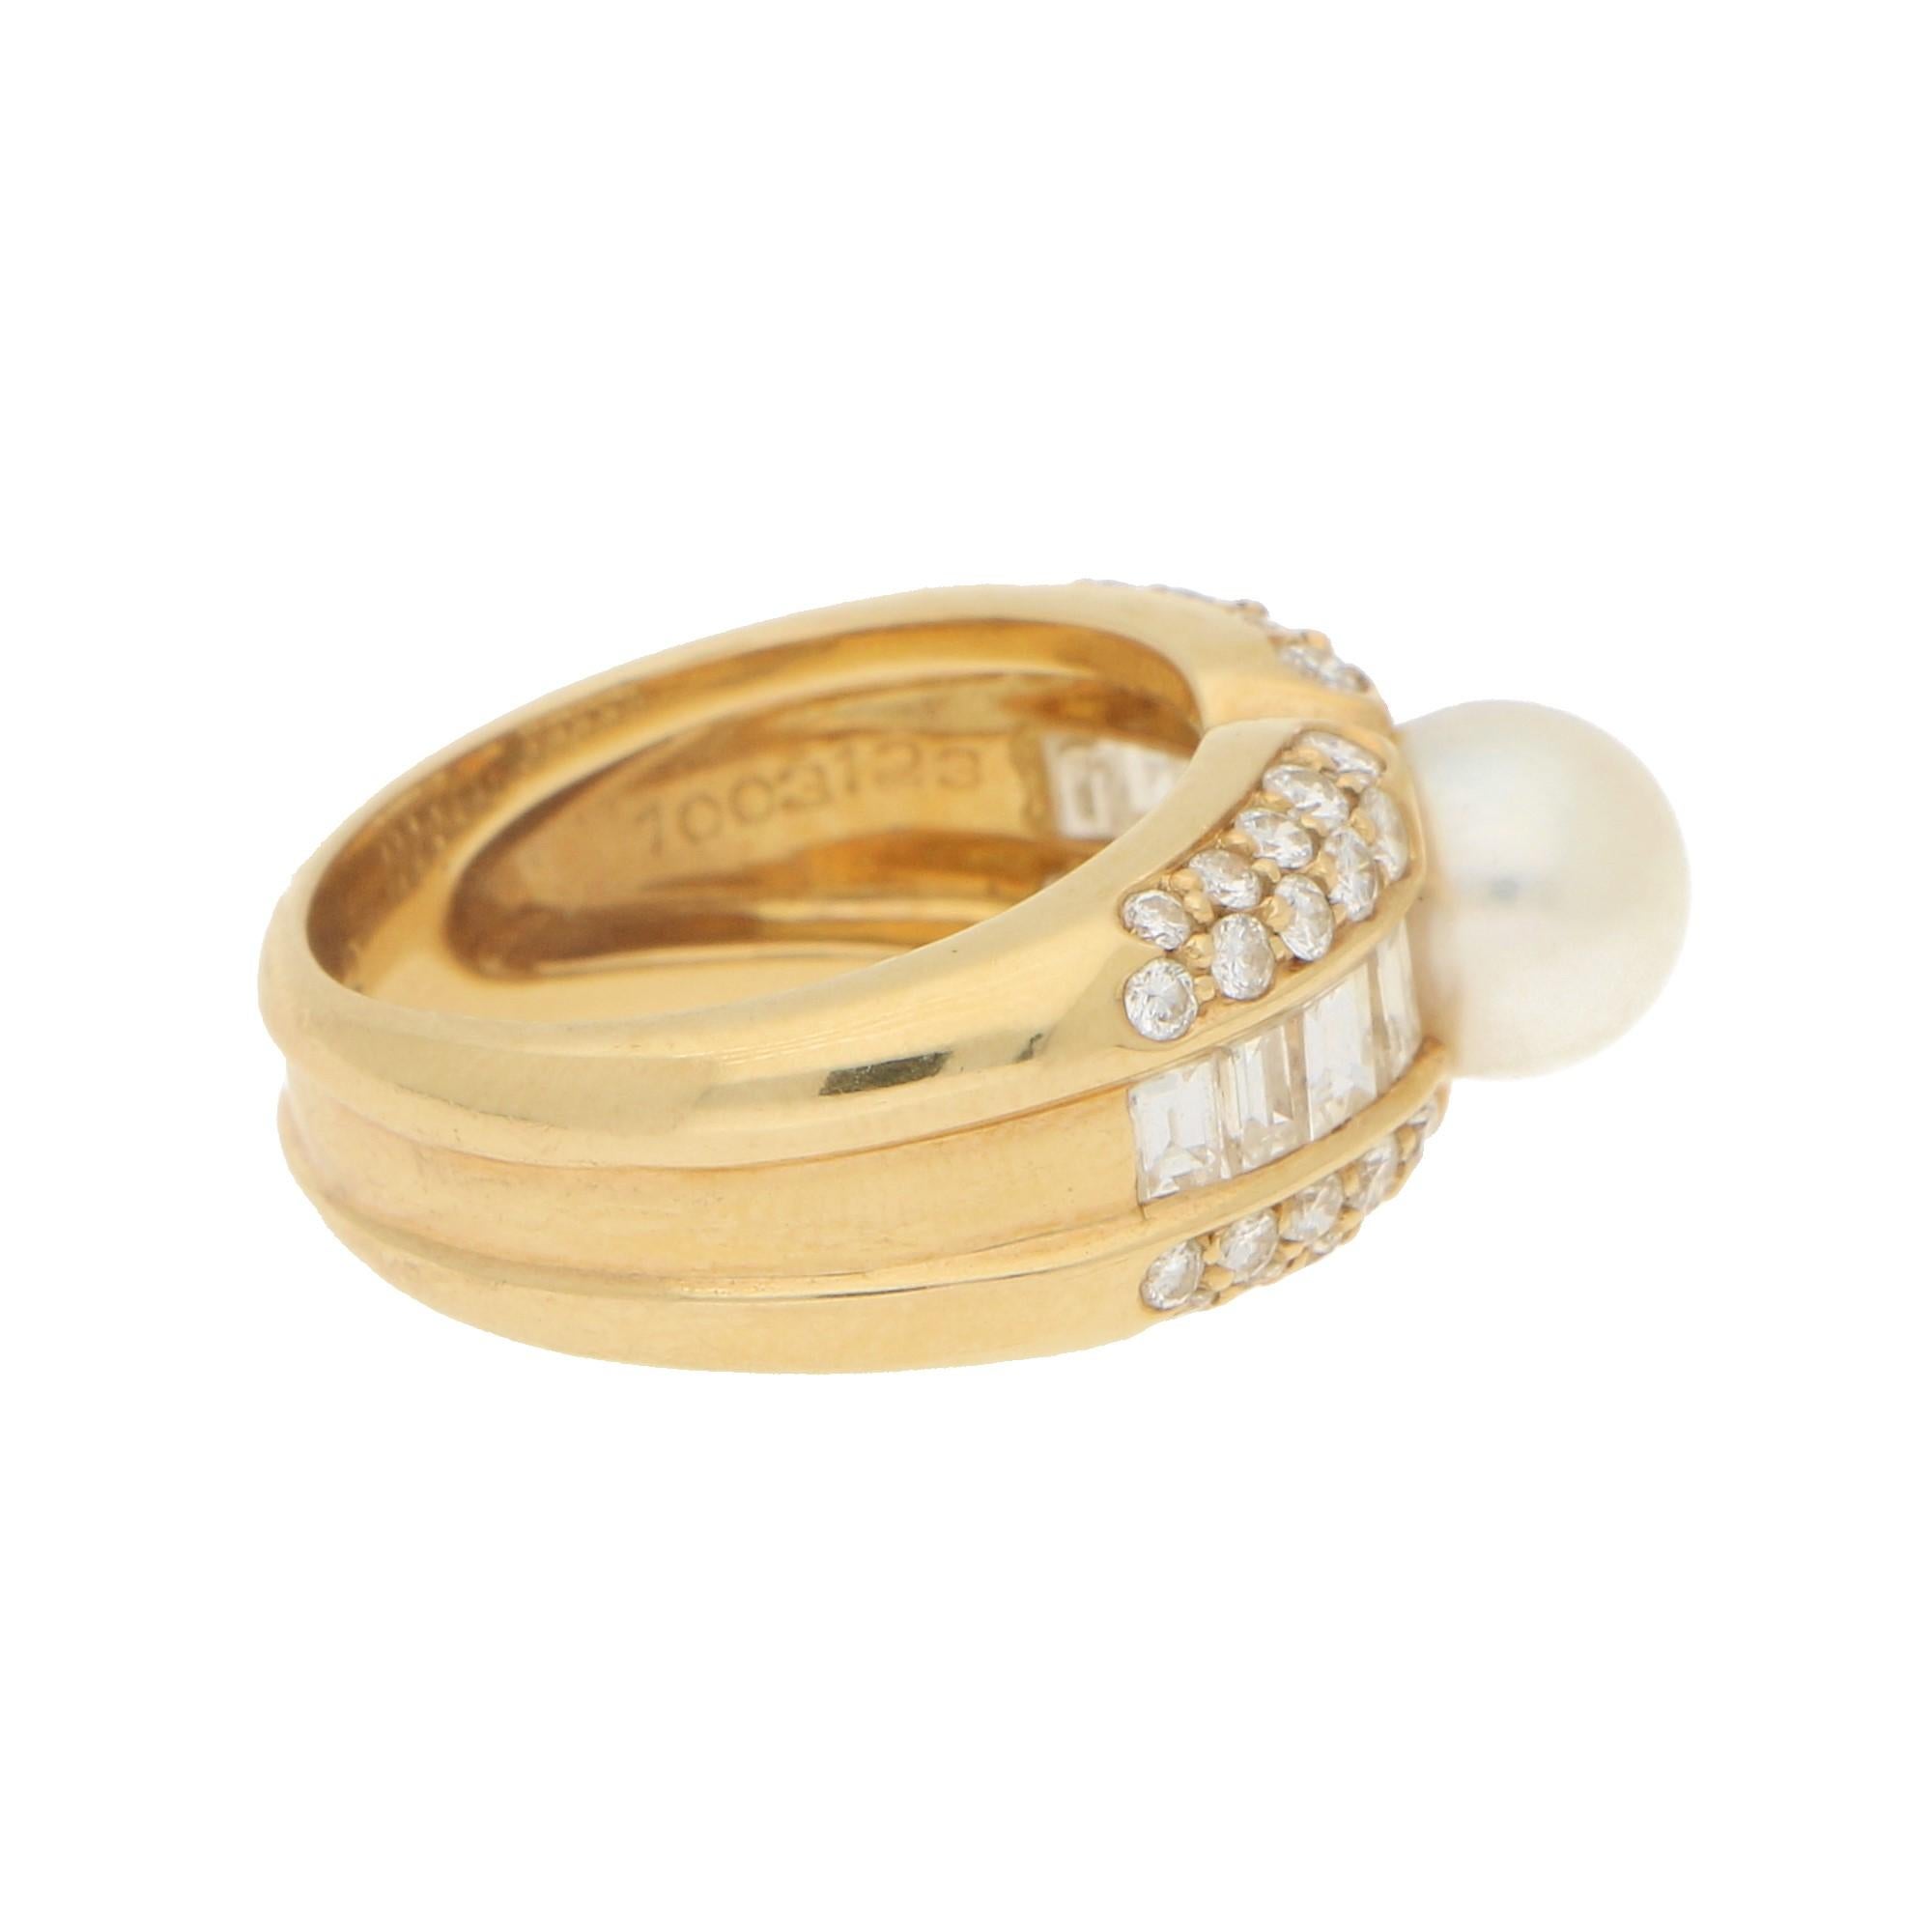 Men's Cartier Pearl and Diamond Bombe Cocktail Ring in 18 Karat Yellow Gold